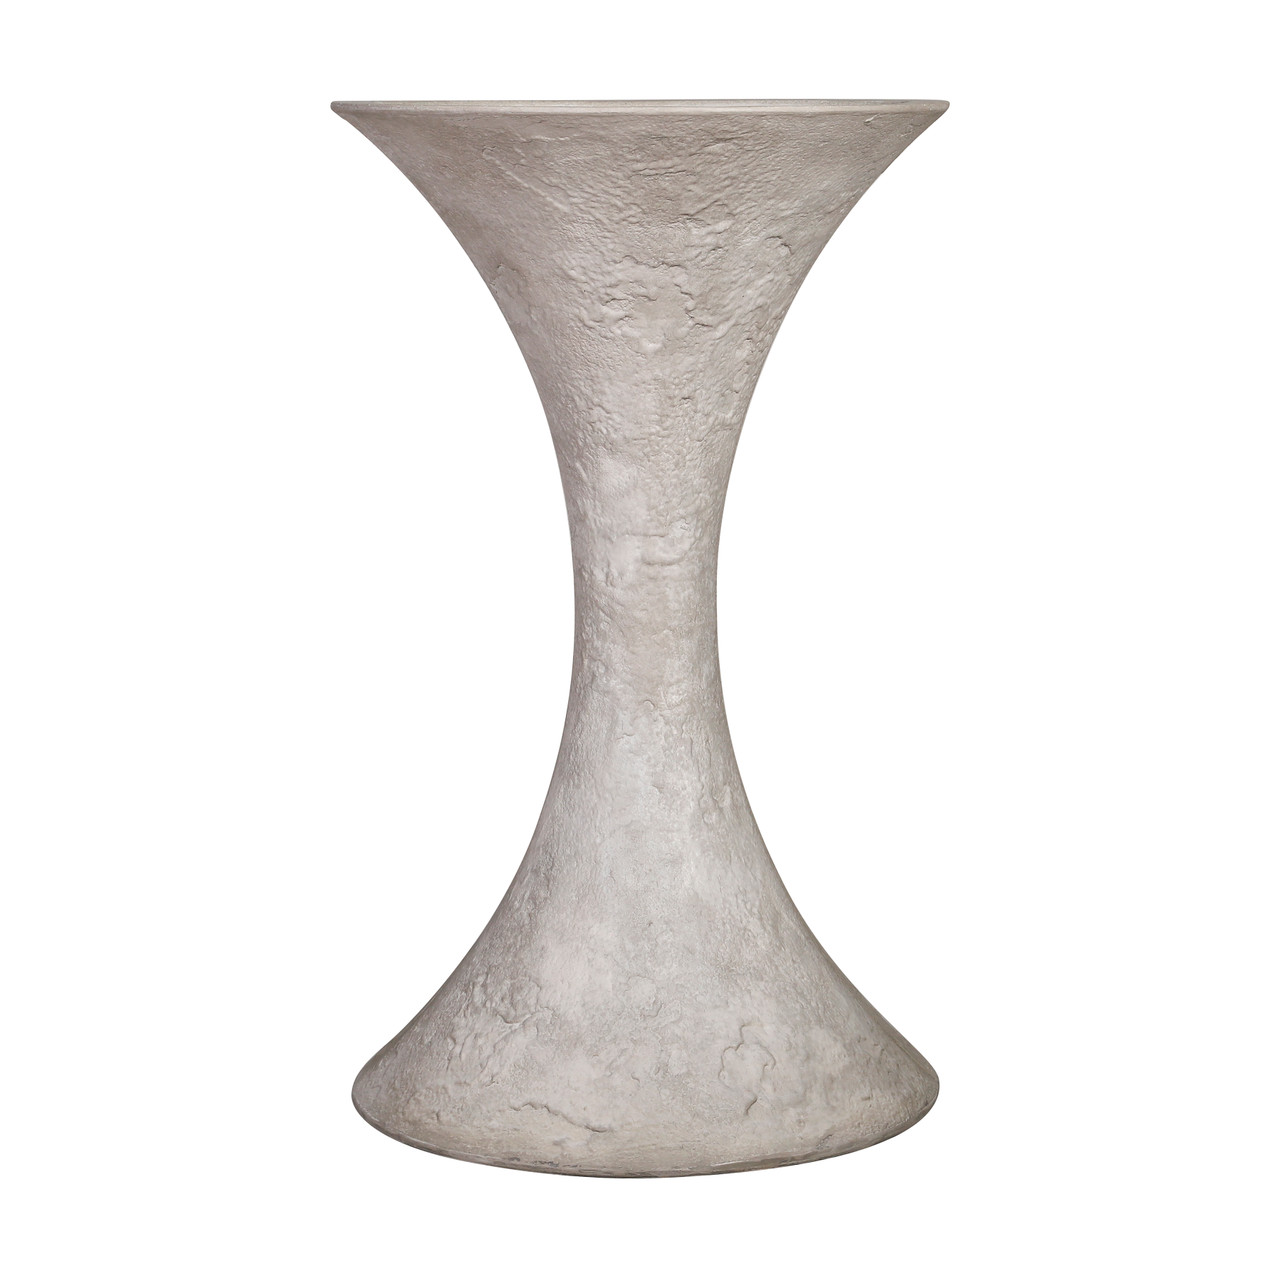 ELK HOME H0117-10551 Hourglass Planter - Large